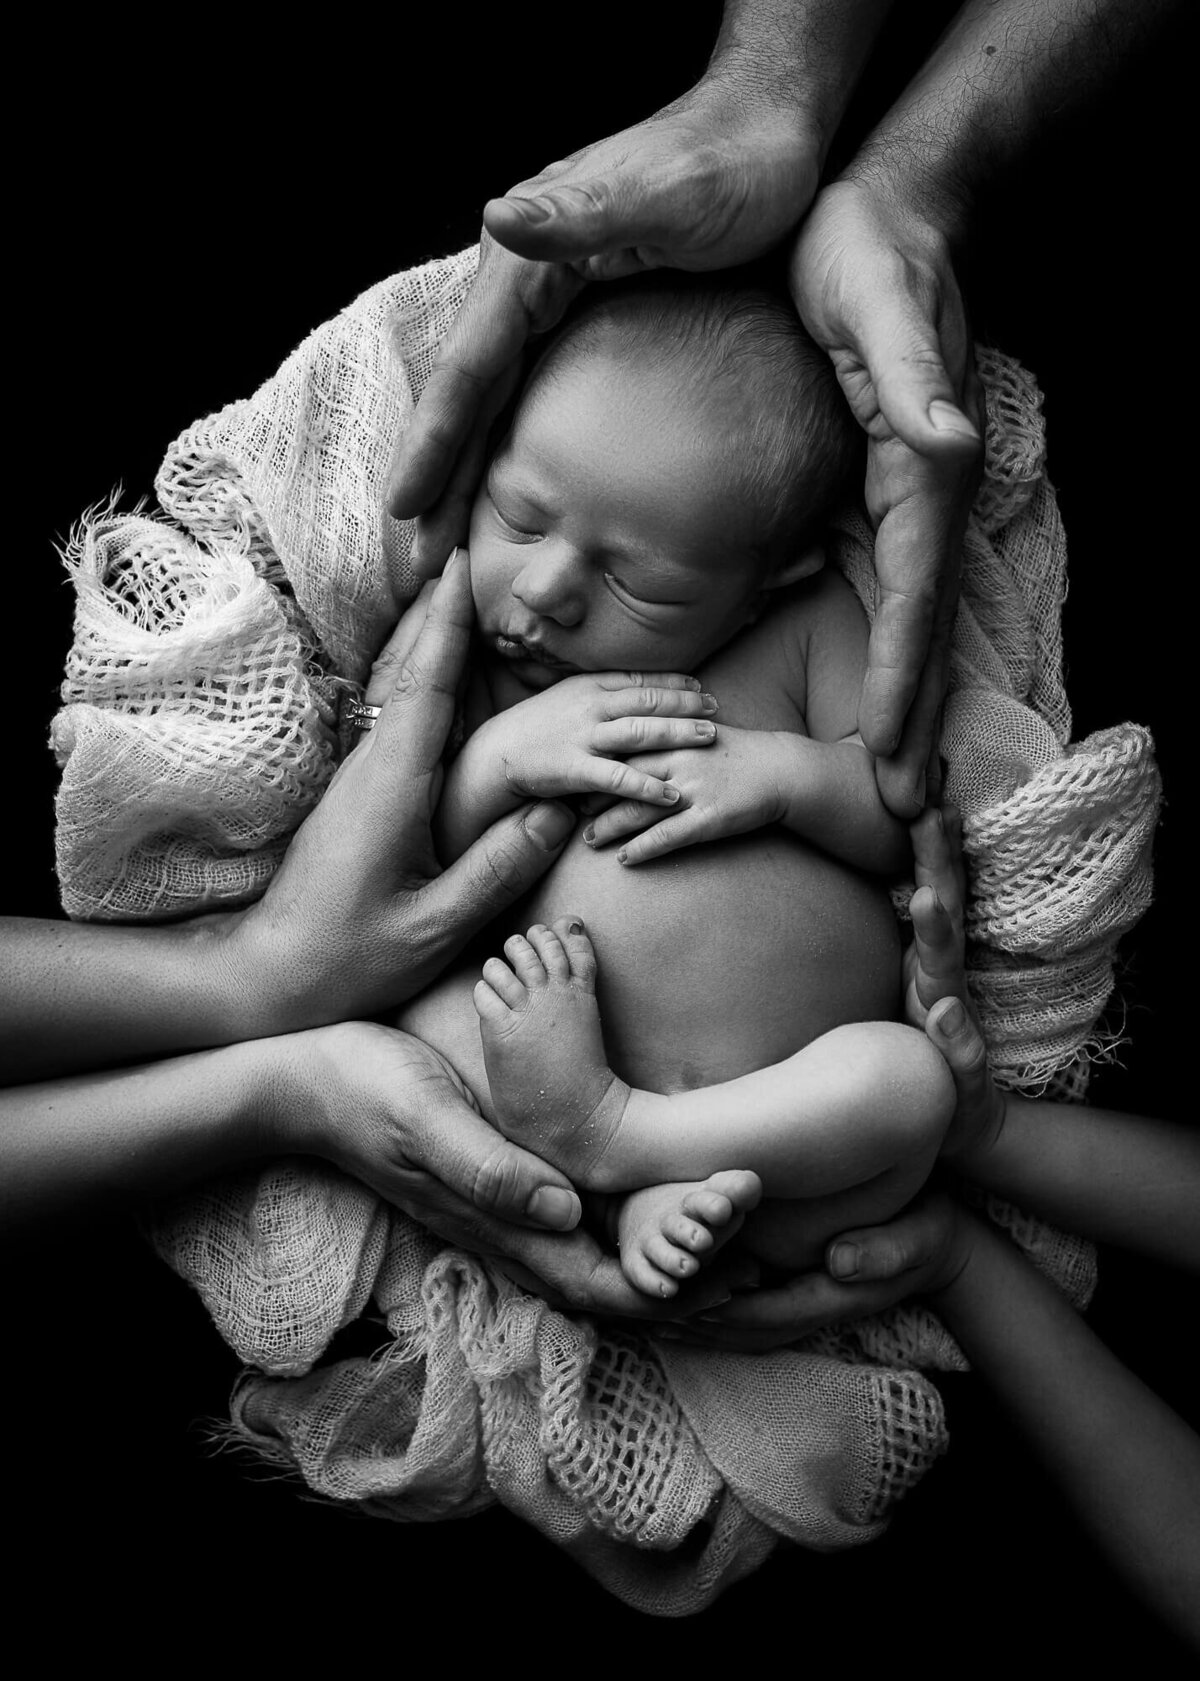 family's hands on baby; black and white portrait